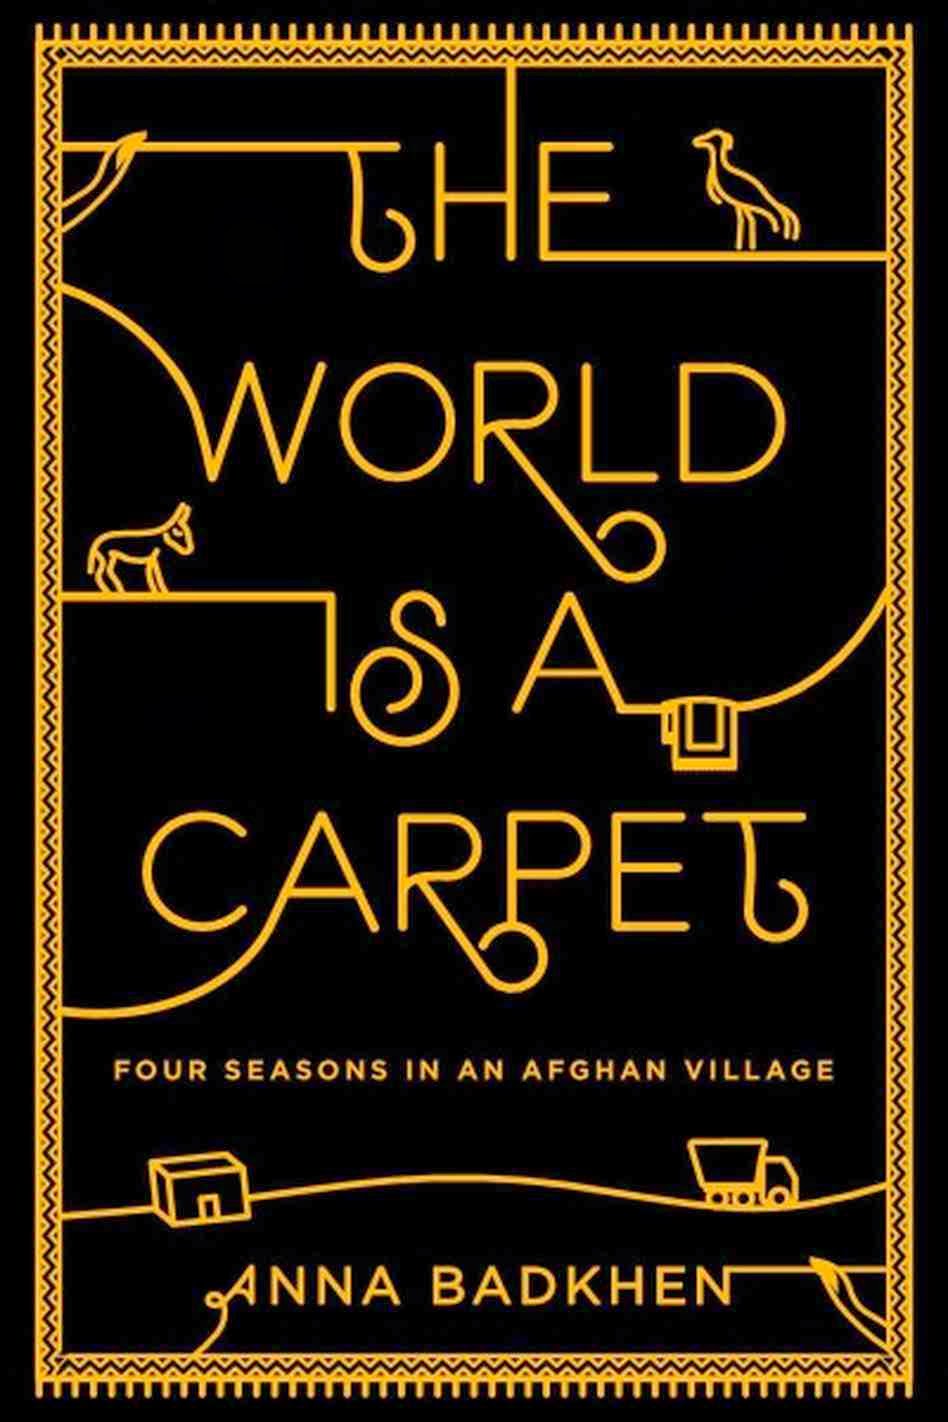 http://discover.halifaxpubliclibraries.ca/?q=title:world%20is%20a%20carpet